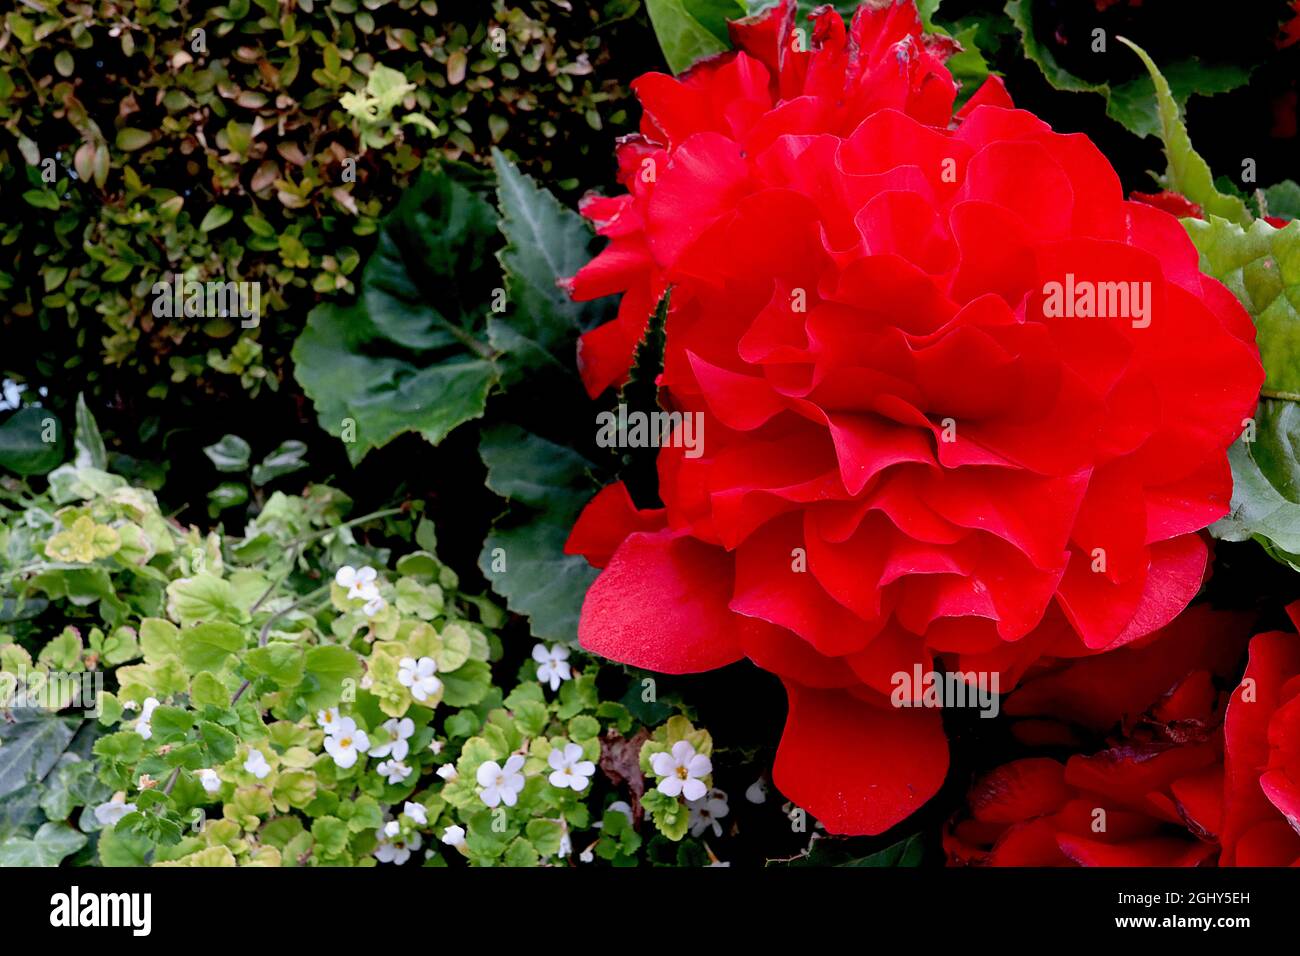 Begonia tuberosa ‘Nonstop Red’ double red flowers and dark green angel-shaped leaves with green veins,  August, England, UK Stock Photo